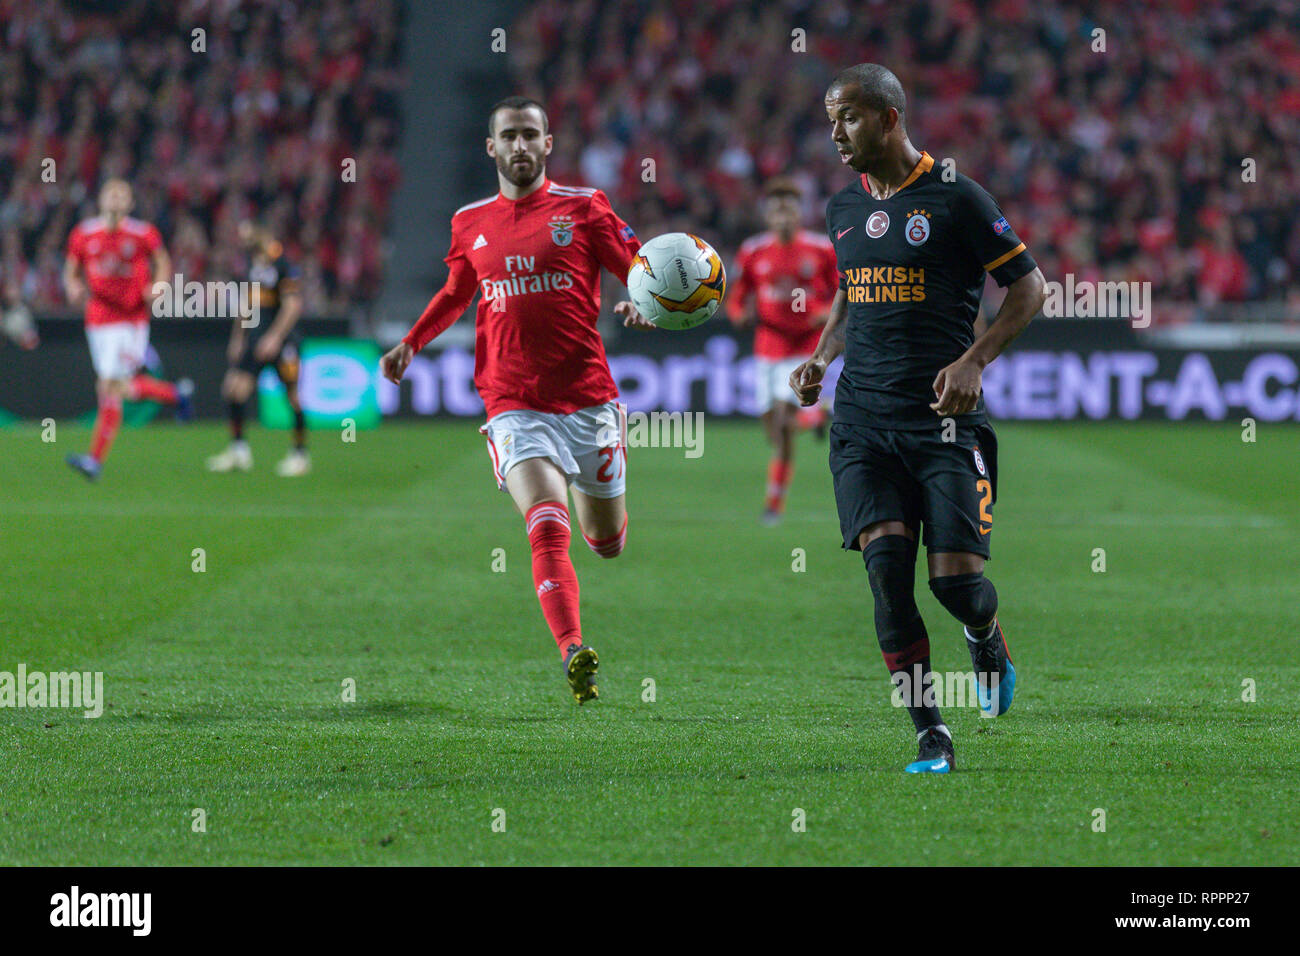 Lisbon, Portugal. 21st Feb, 2019. February 21, 2019. Lisbon, Portugal. Galatasaray's defender from Brazil Mariano (2) in action during the game of the UEFA Europa League, Round of 32, SL Benfica vs Galatasaray SK Credit: Alexandre de Sousa/Alamy Live News Stock Photo